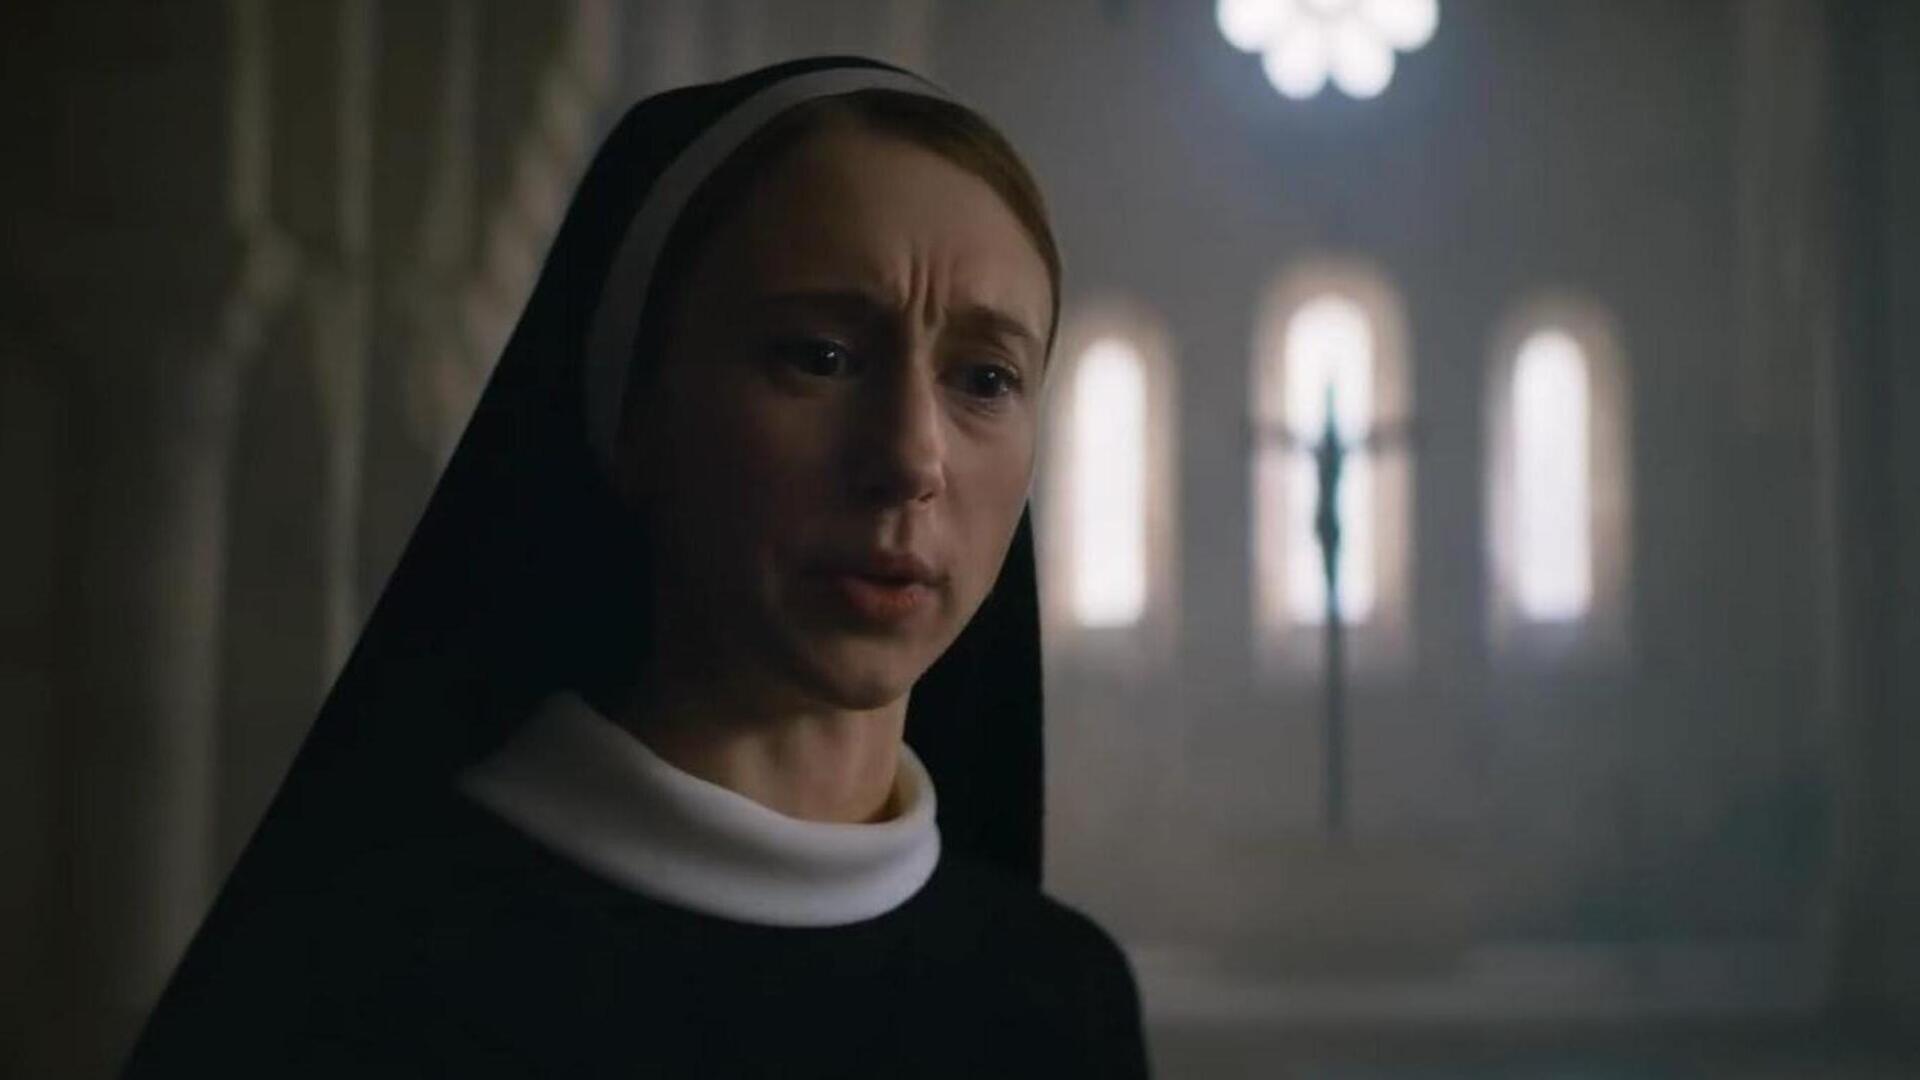 Box office collection: 'The Nun II' is successful in India